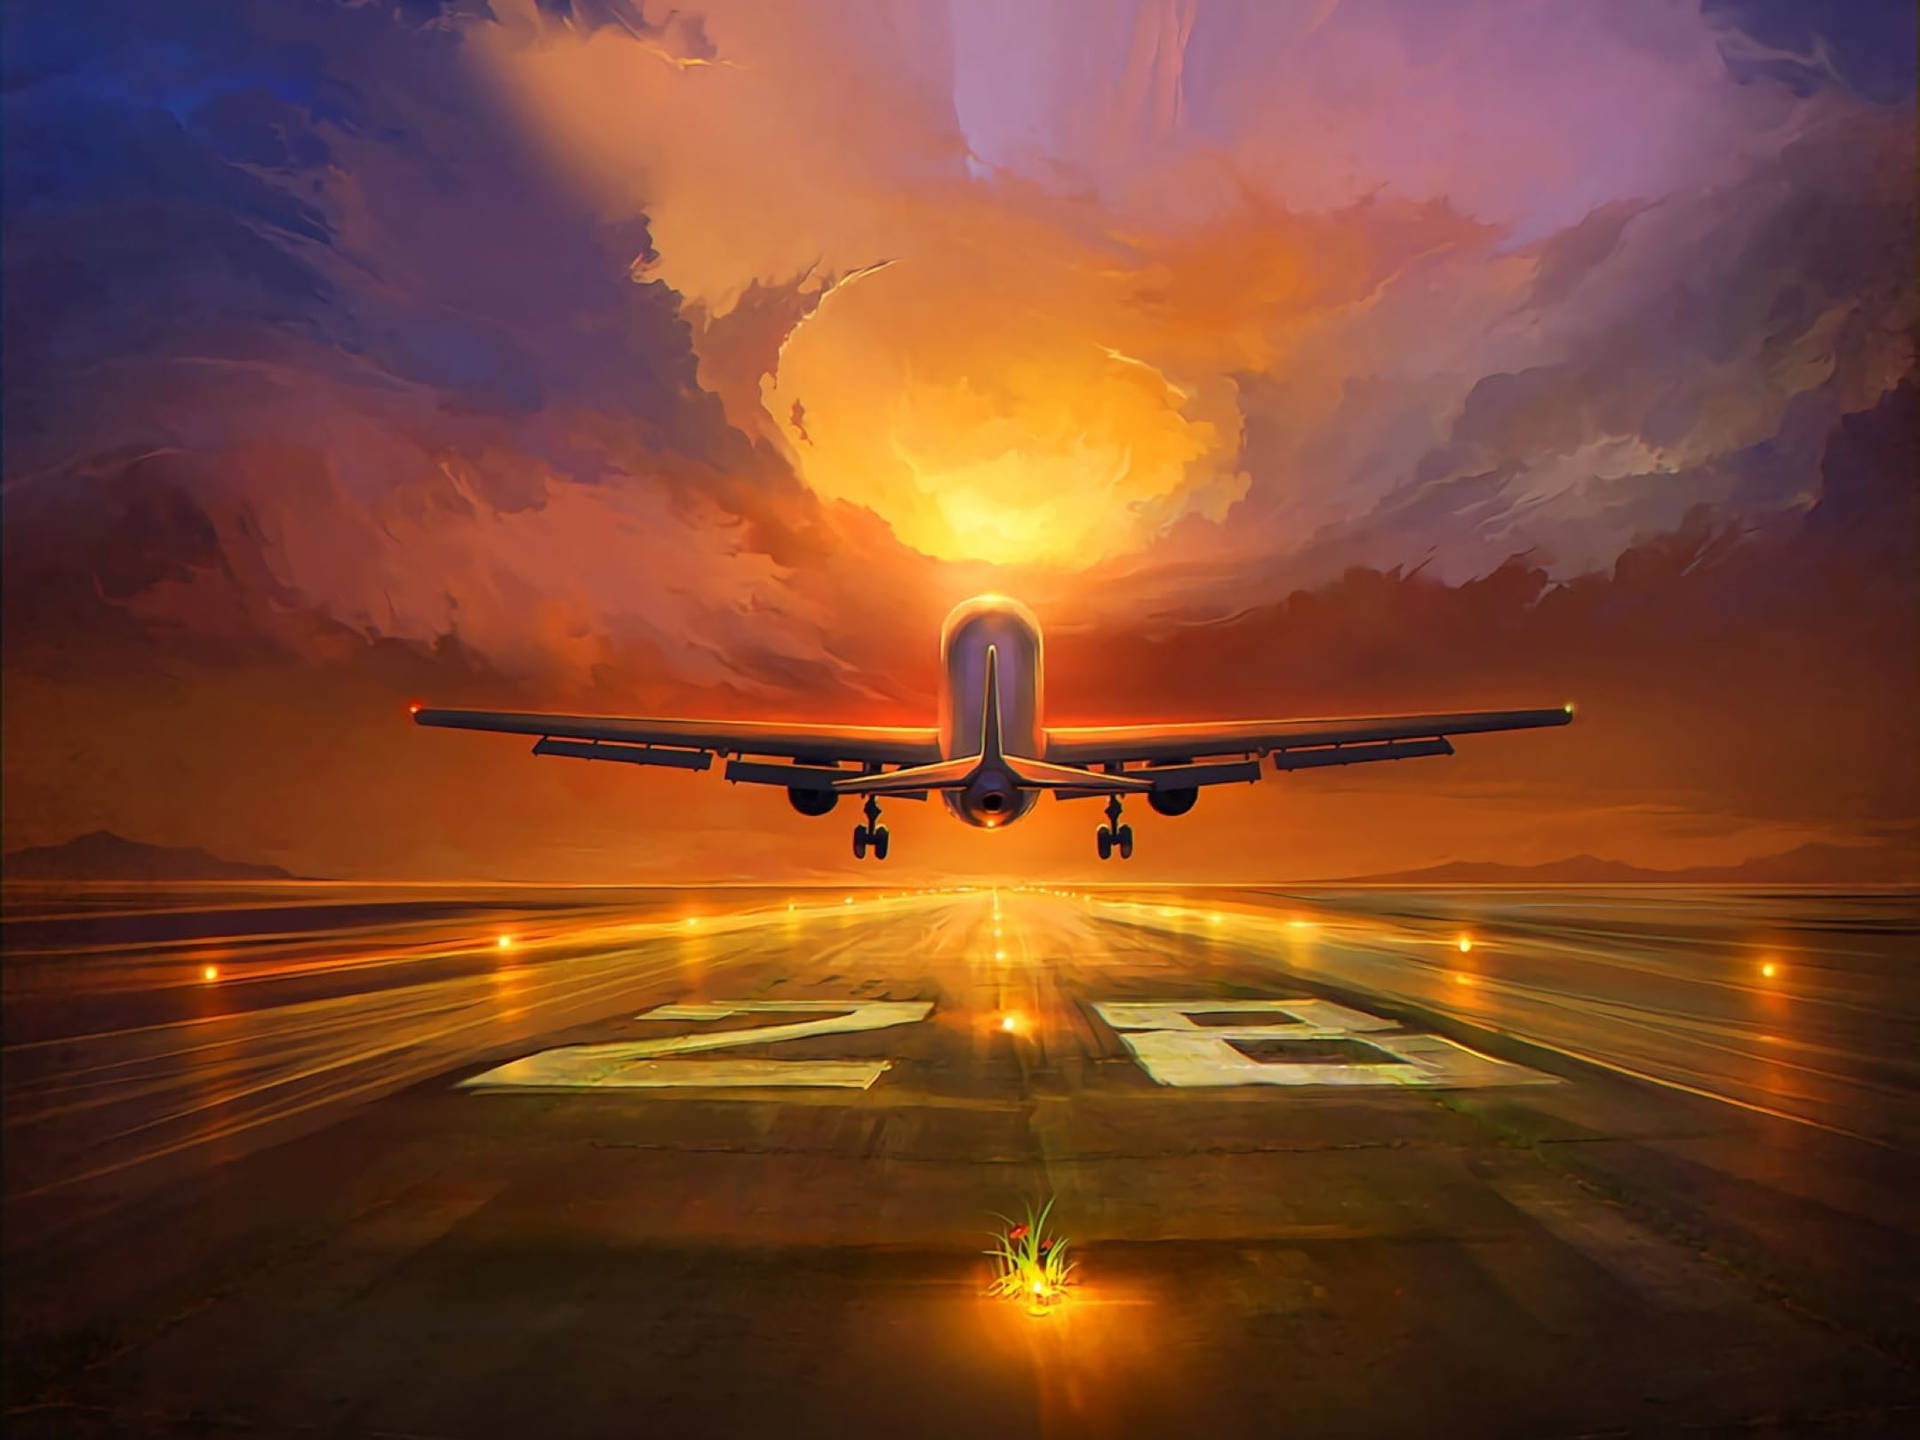 Captivating Artwork on Runway With an Airplane In View Wallpaper